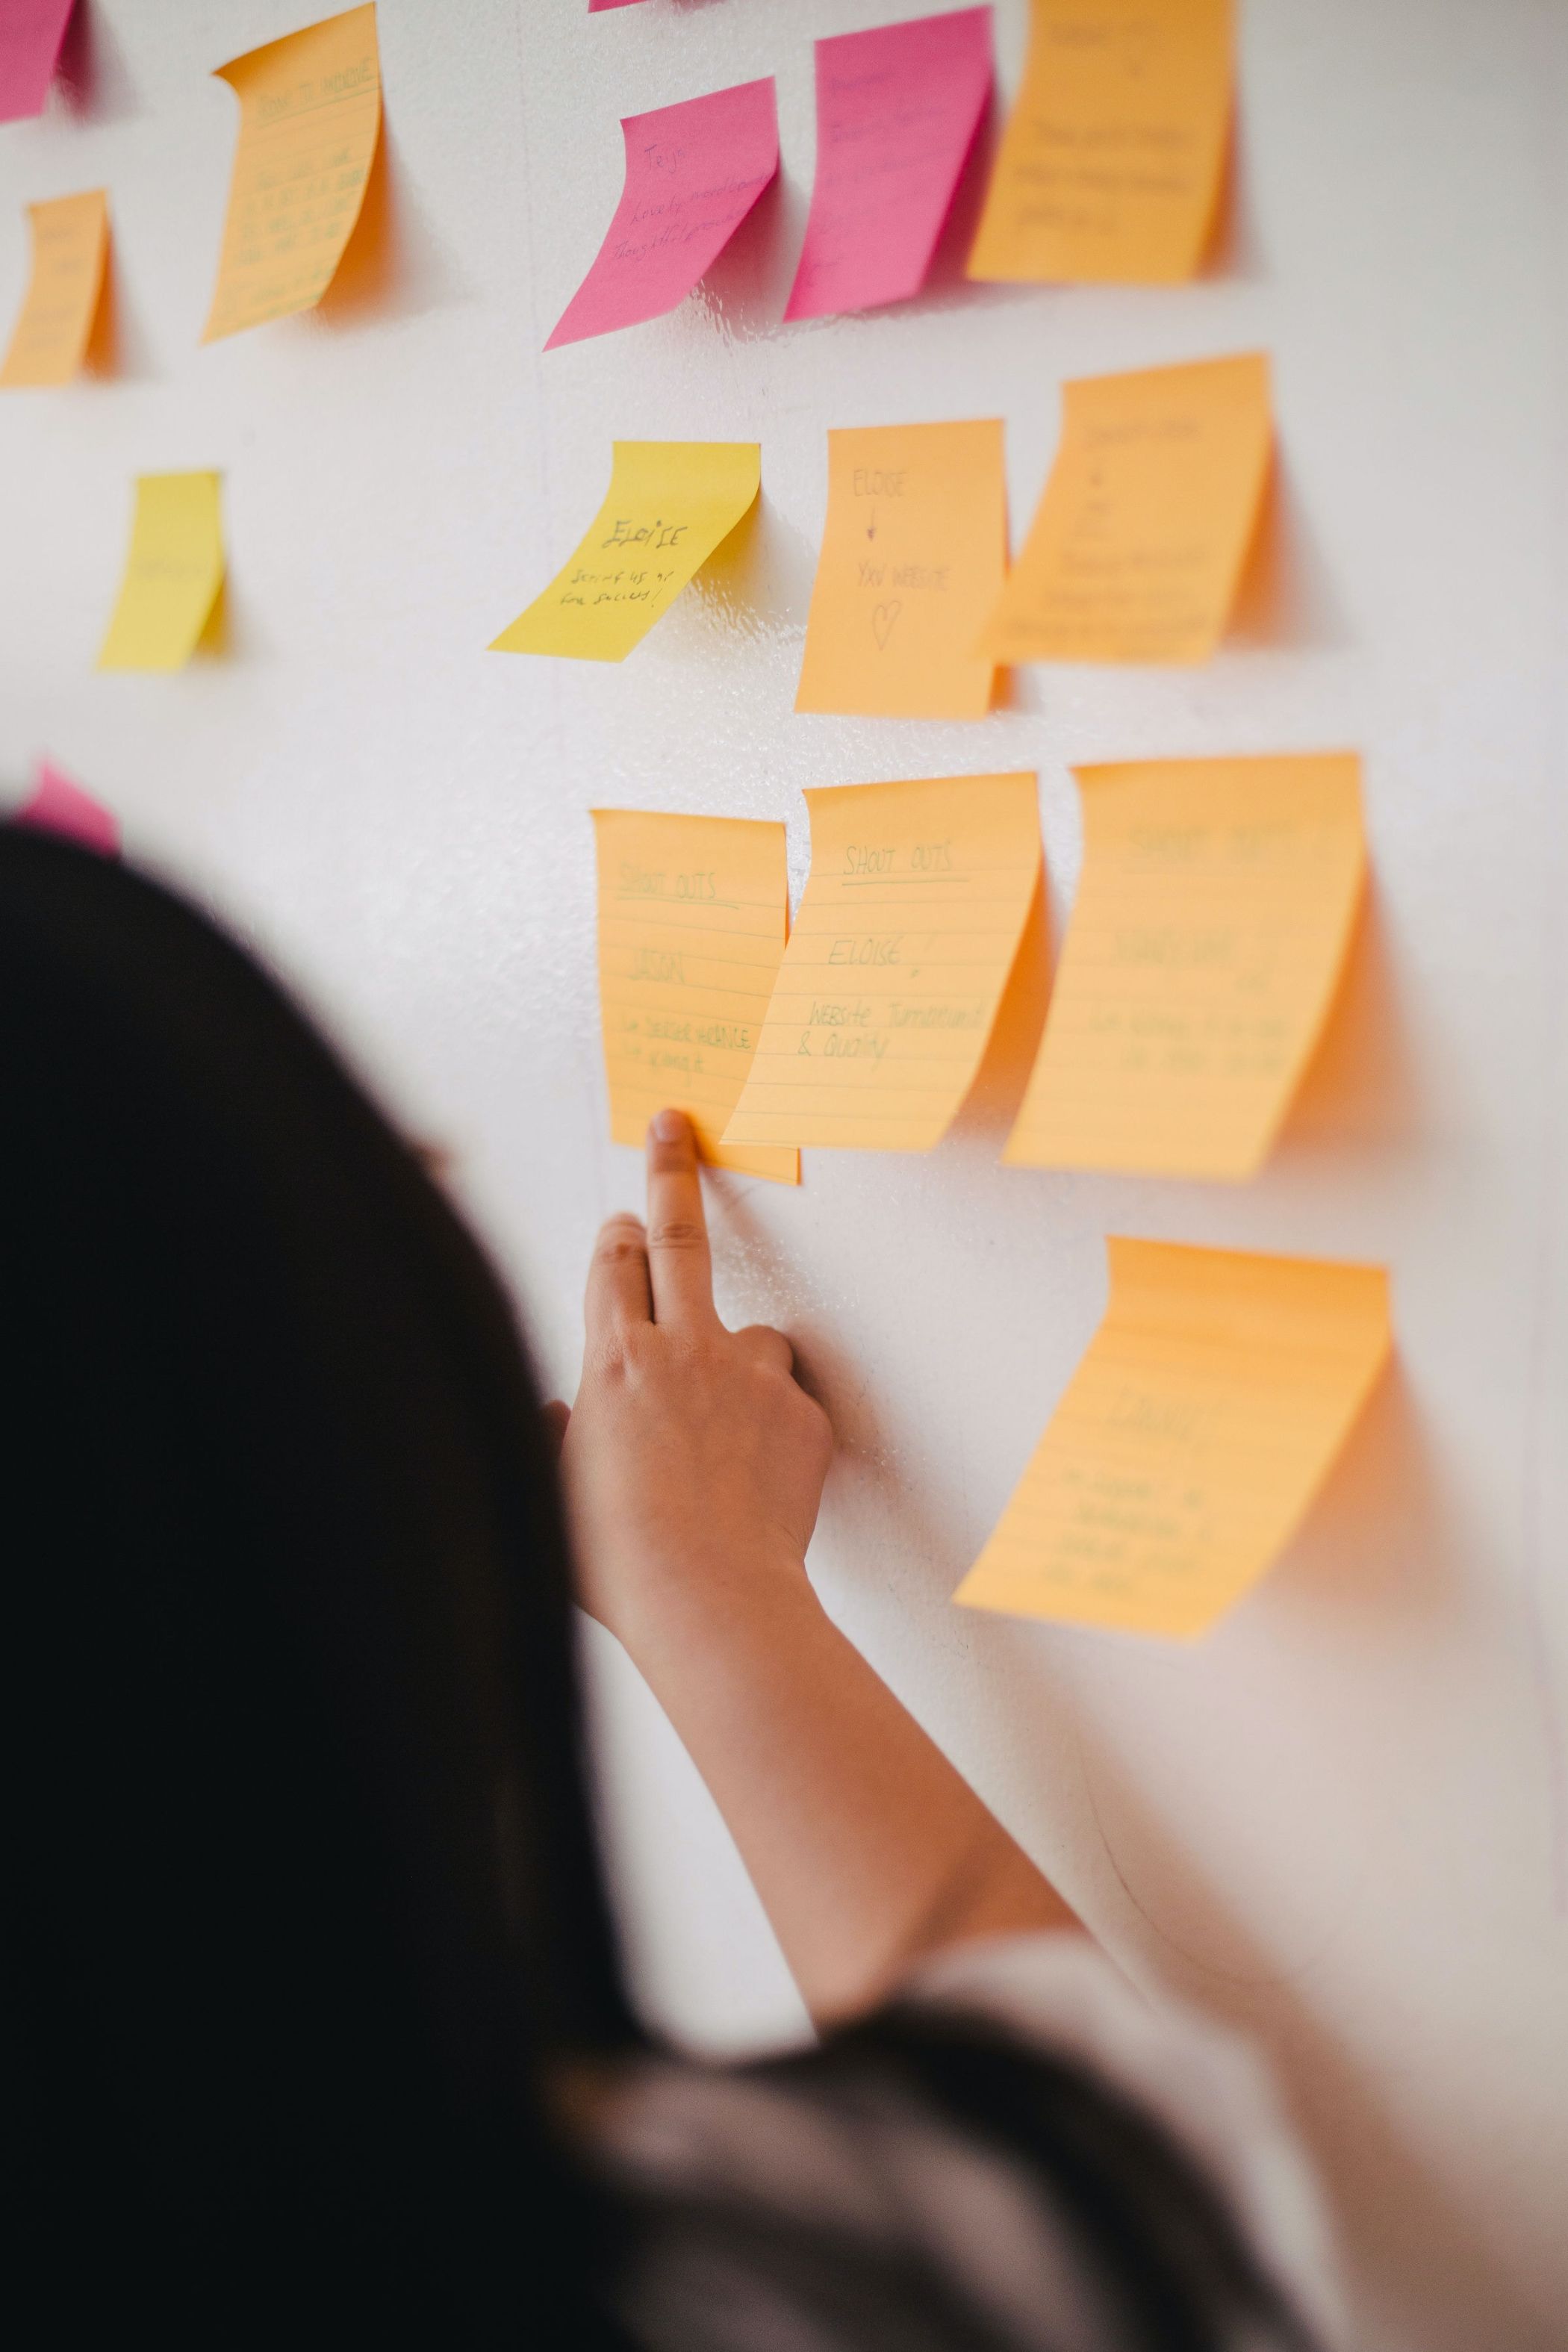 How to generate product ideas in software development